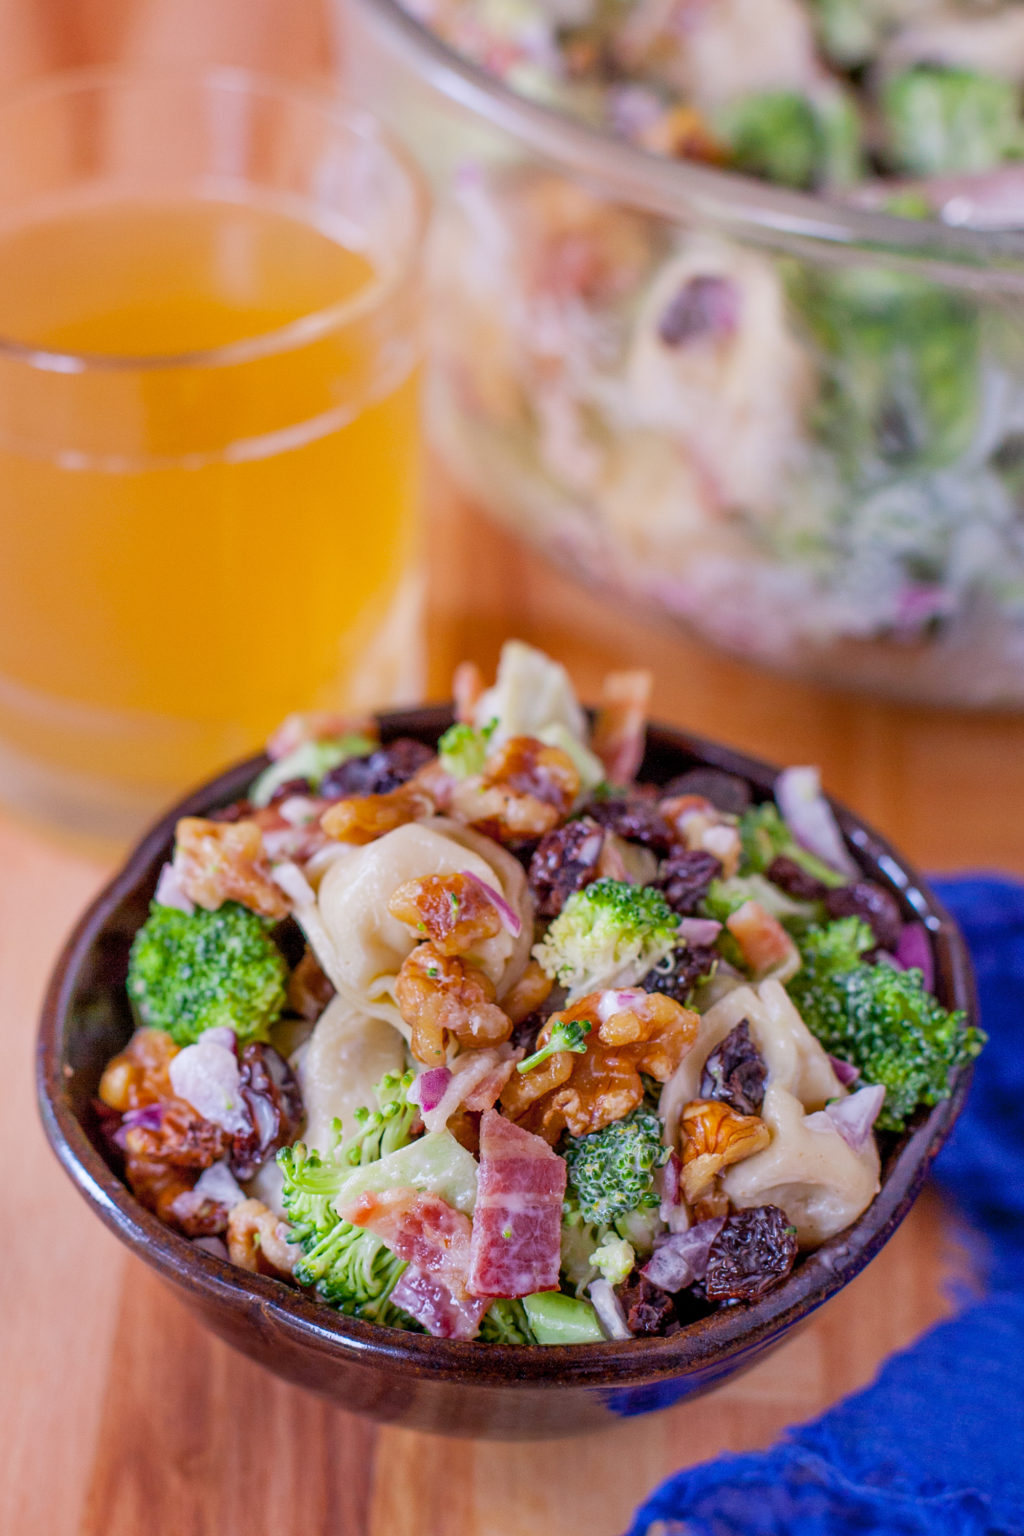 Broccoli Tortellini Salad Recipe is a Complete Meal - Eating Richly